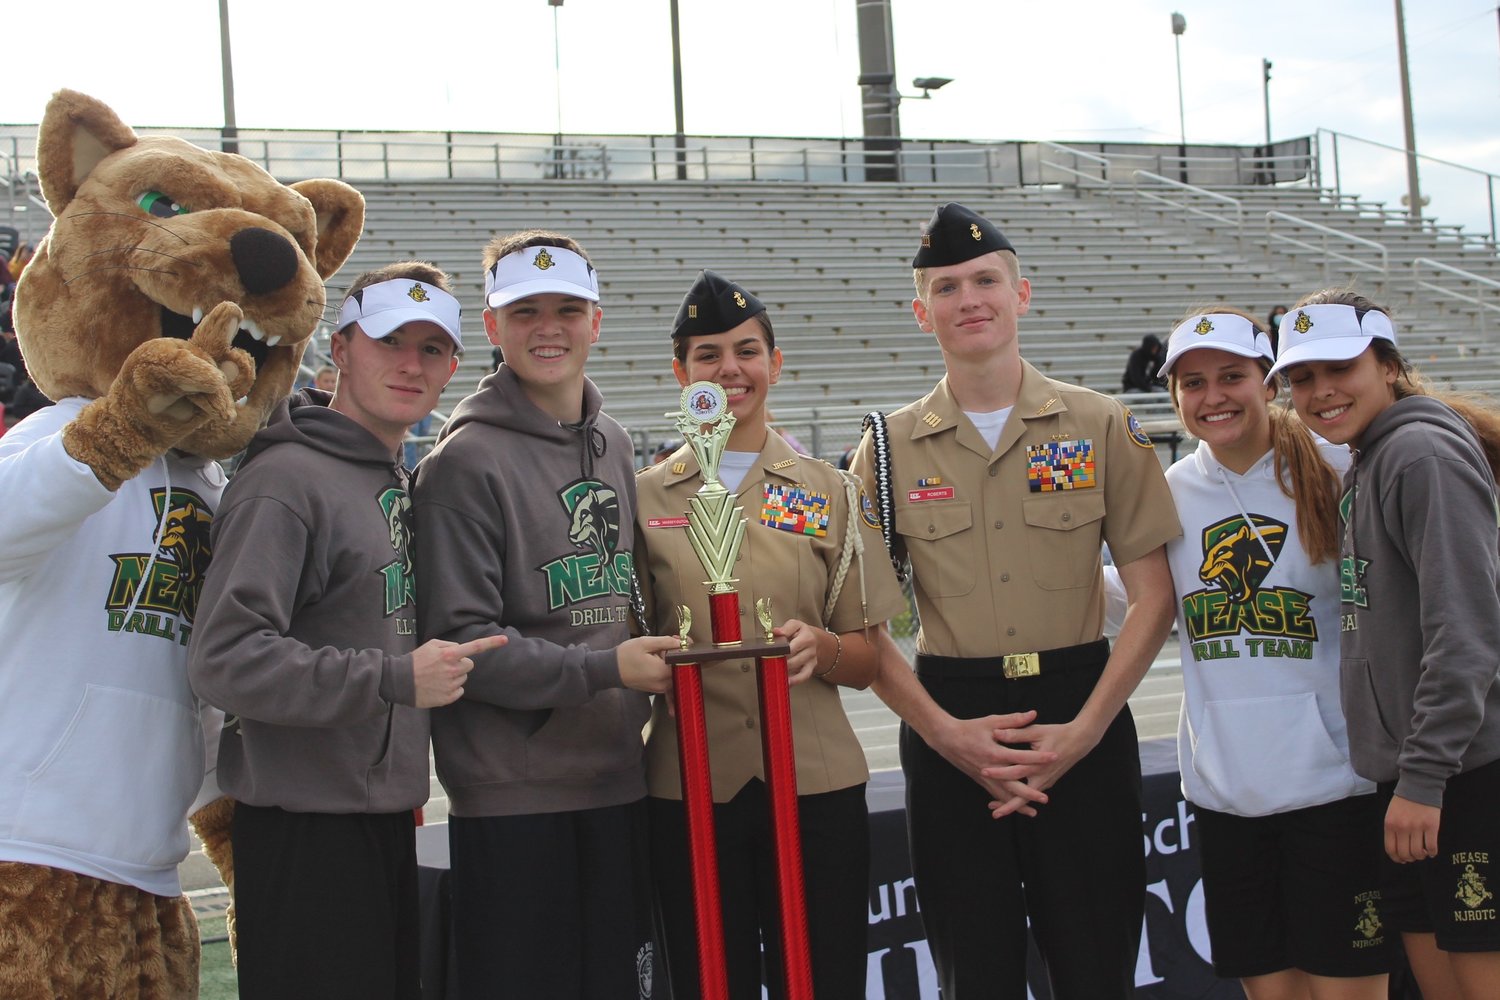 Nease’s dynamic “Fab Four” senior drill commanders Brodie Mongon (armed basic), Daniel Mahoney (armed exhibition), Kaitlyn Boggs (unarmed basic) and Isabella Rivera (unarmed exhibition and color guard) received first-place drill overall at all three competitions.